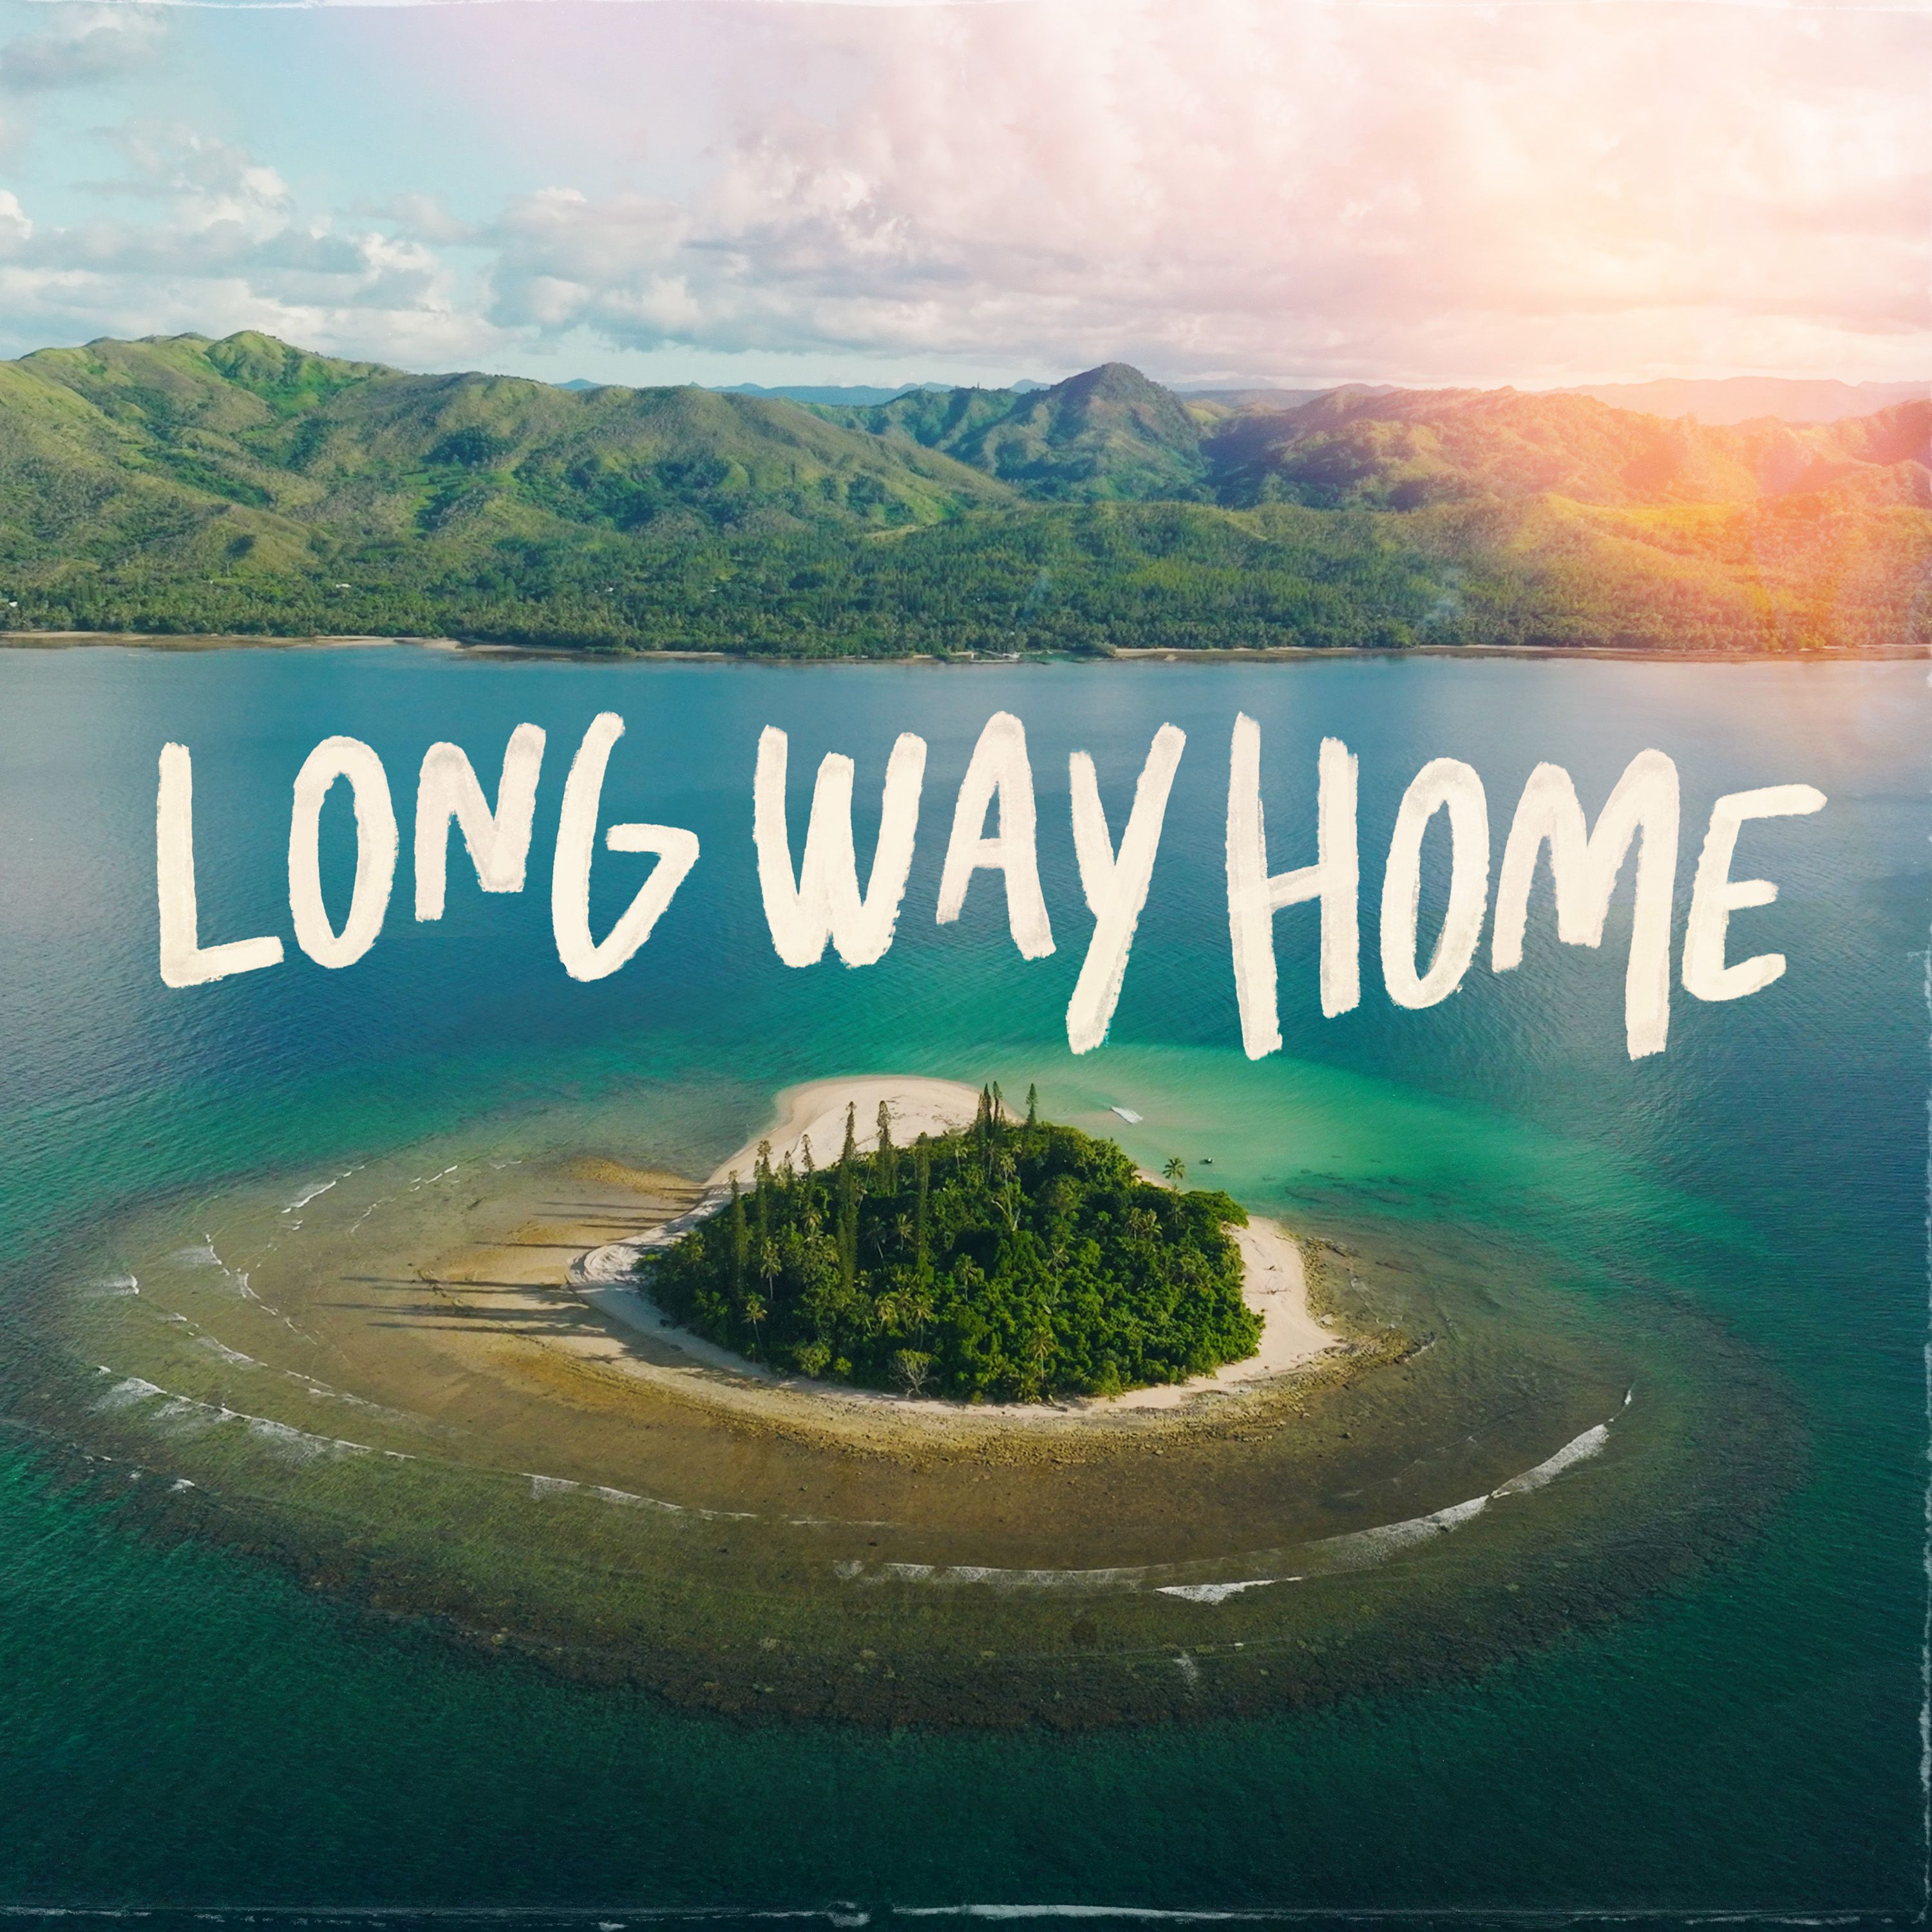 MARCUS GAD SHOWS LOVE FOR HIS HOME ISLAND ON “LONG WAY HOME” SINGLE